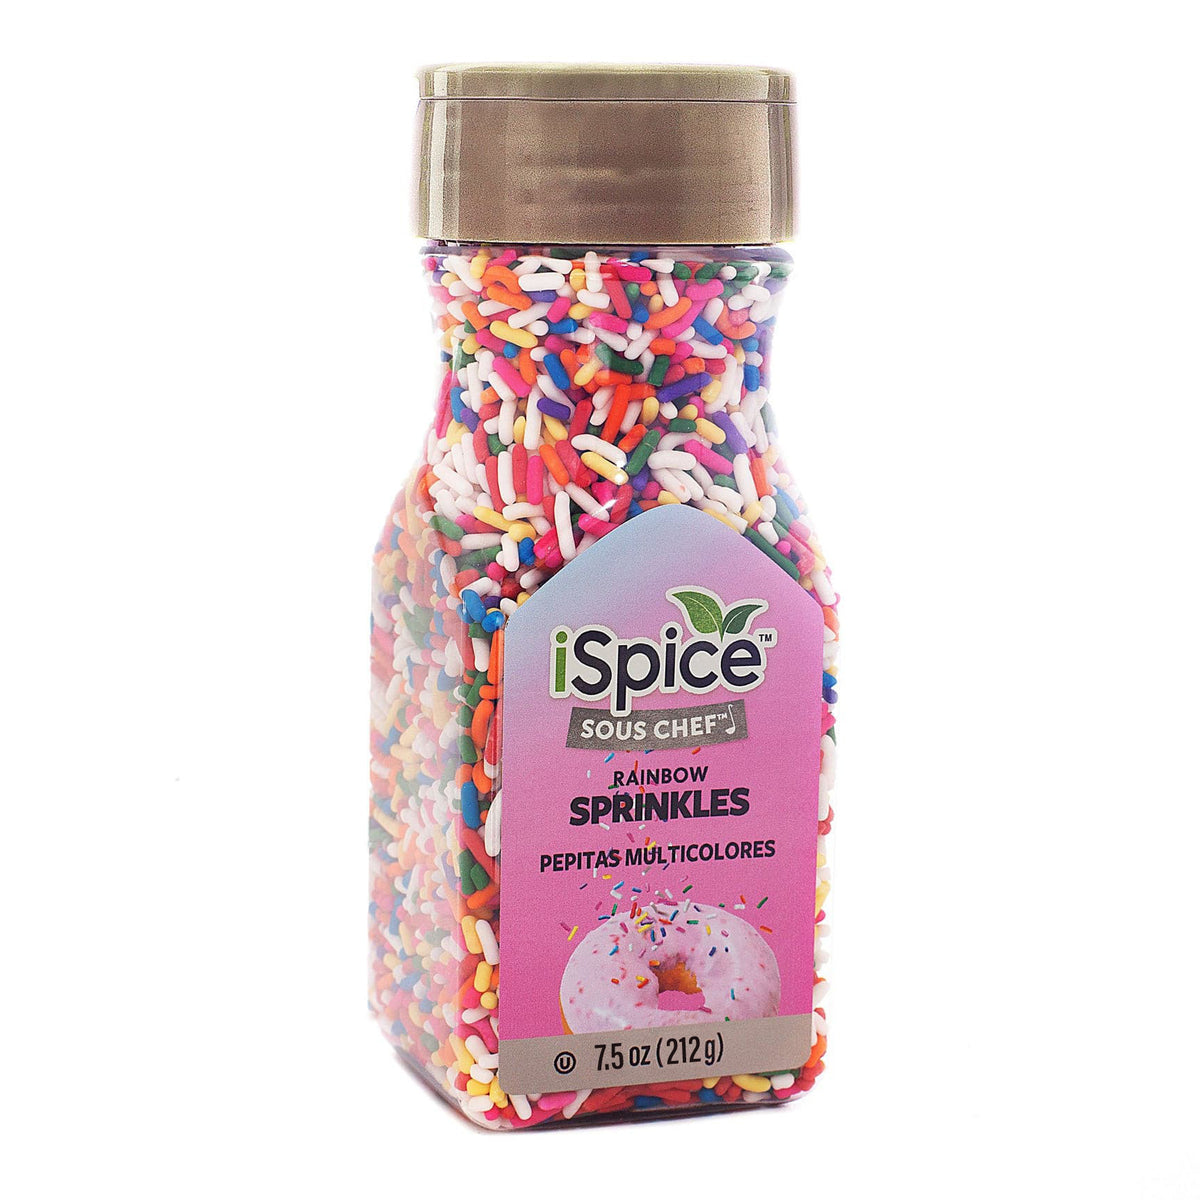 Rainbow Sprinkle Recipes That Will Make Your Dessert Extra Fun